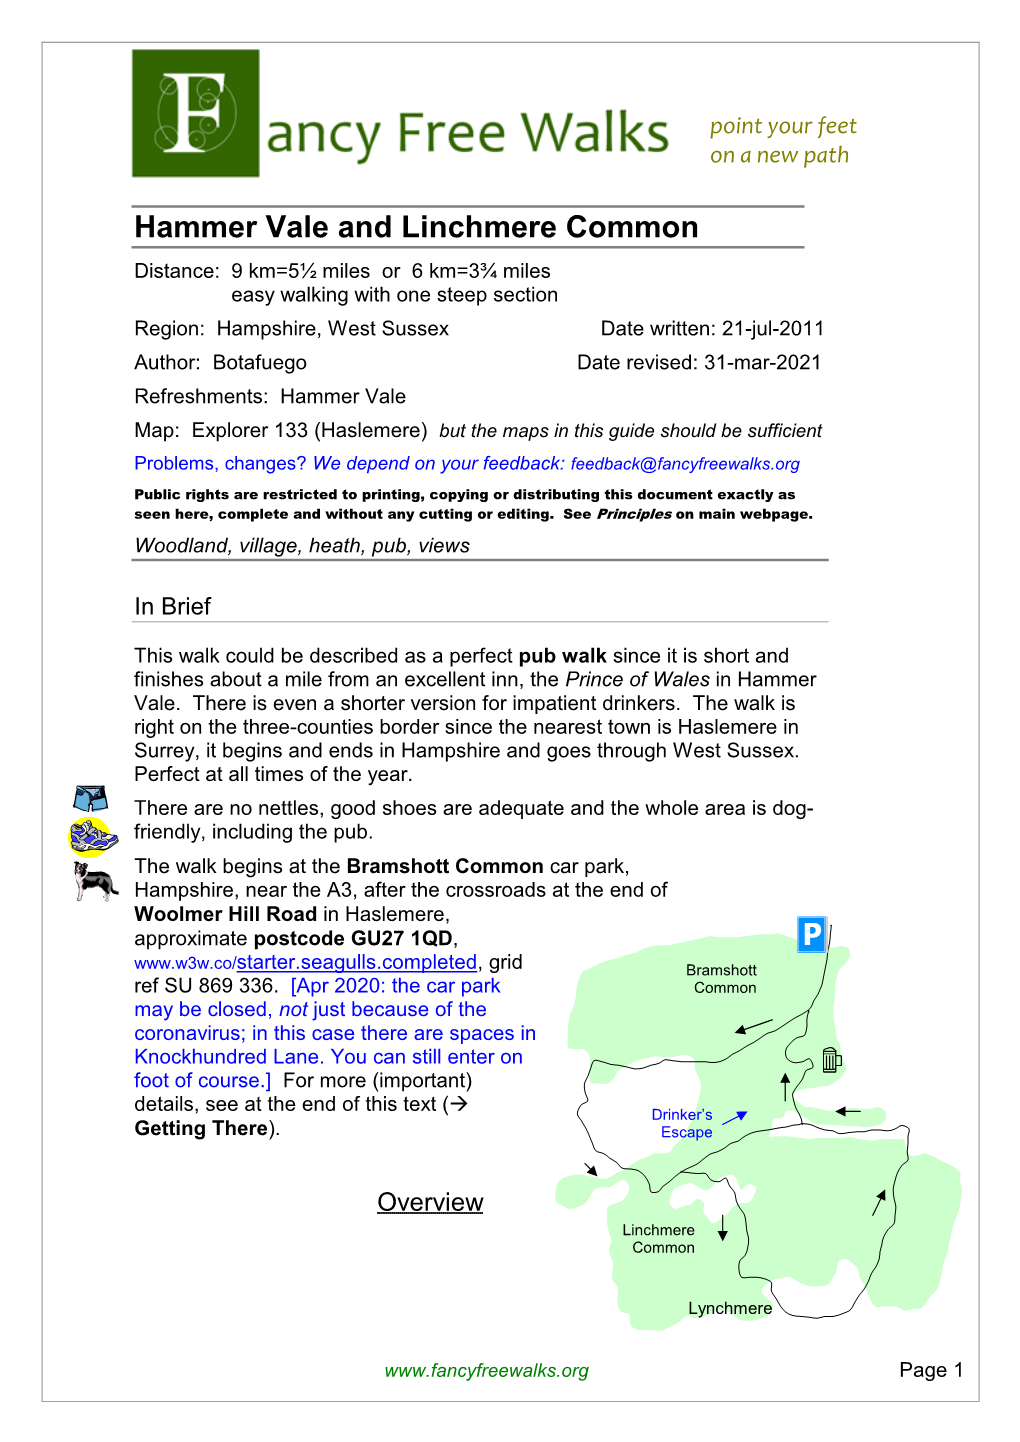 Hammer Vale and Linchmere Common